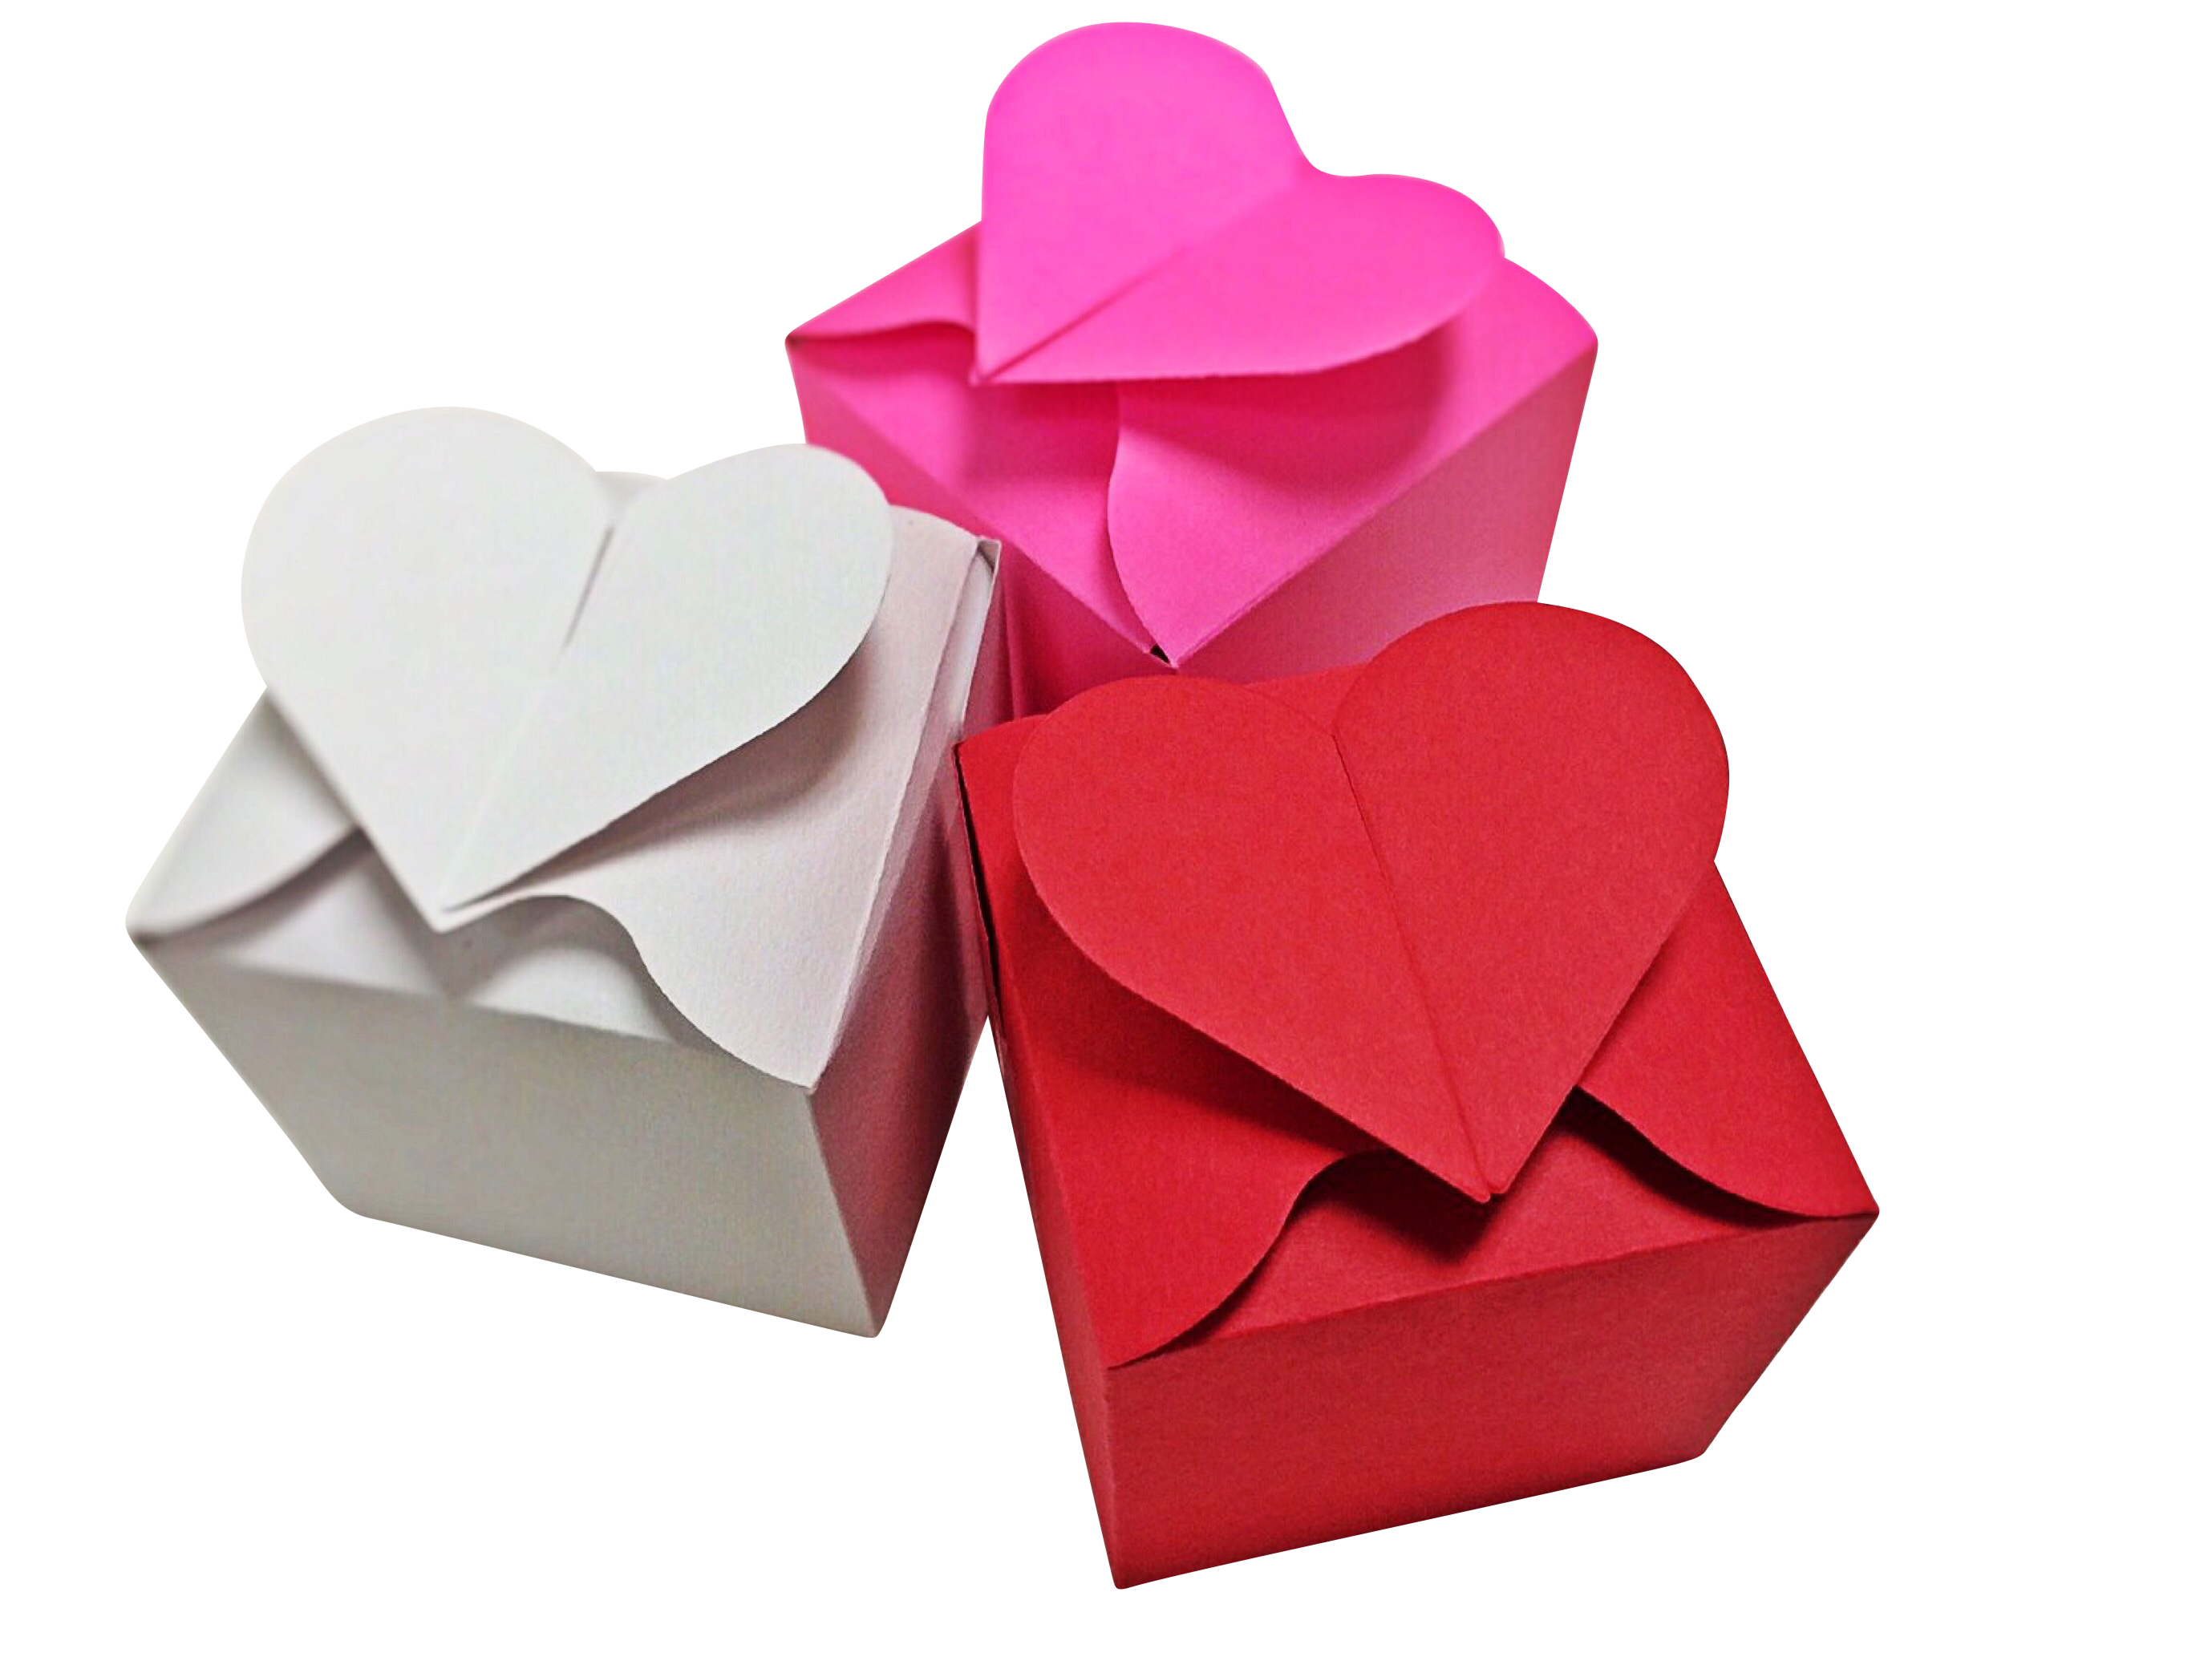 A Group Of Boxes With Hearts On Them